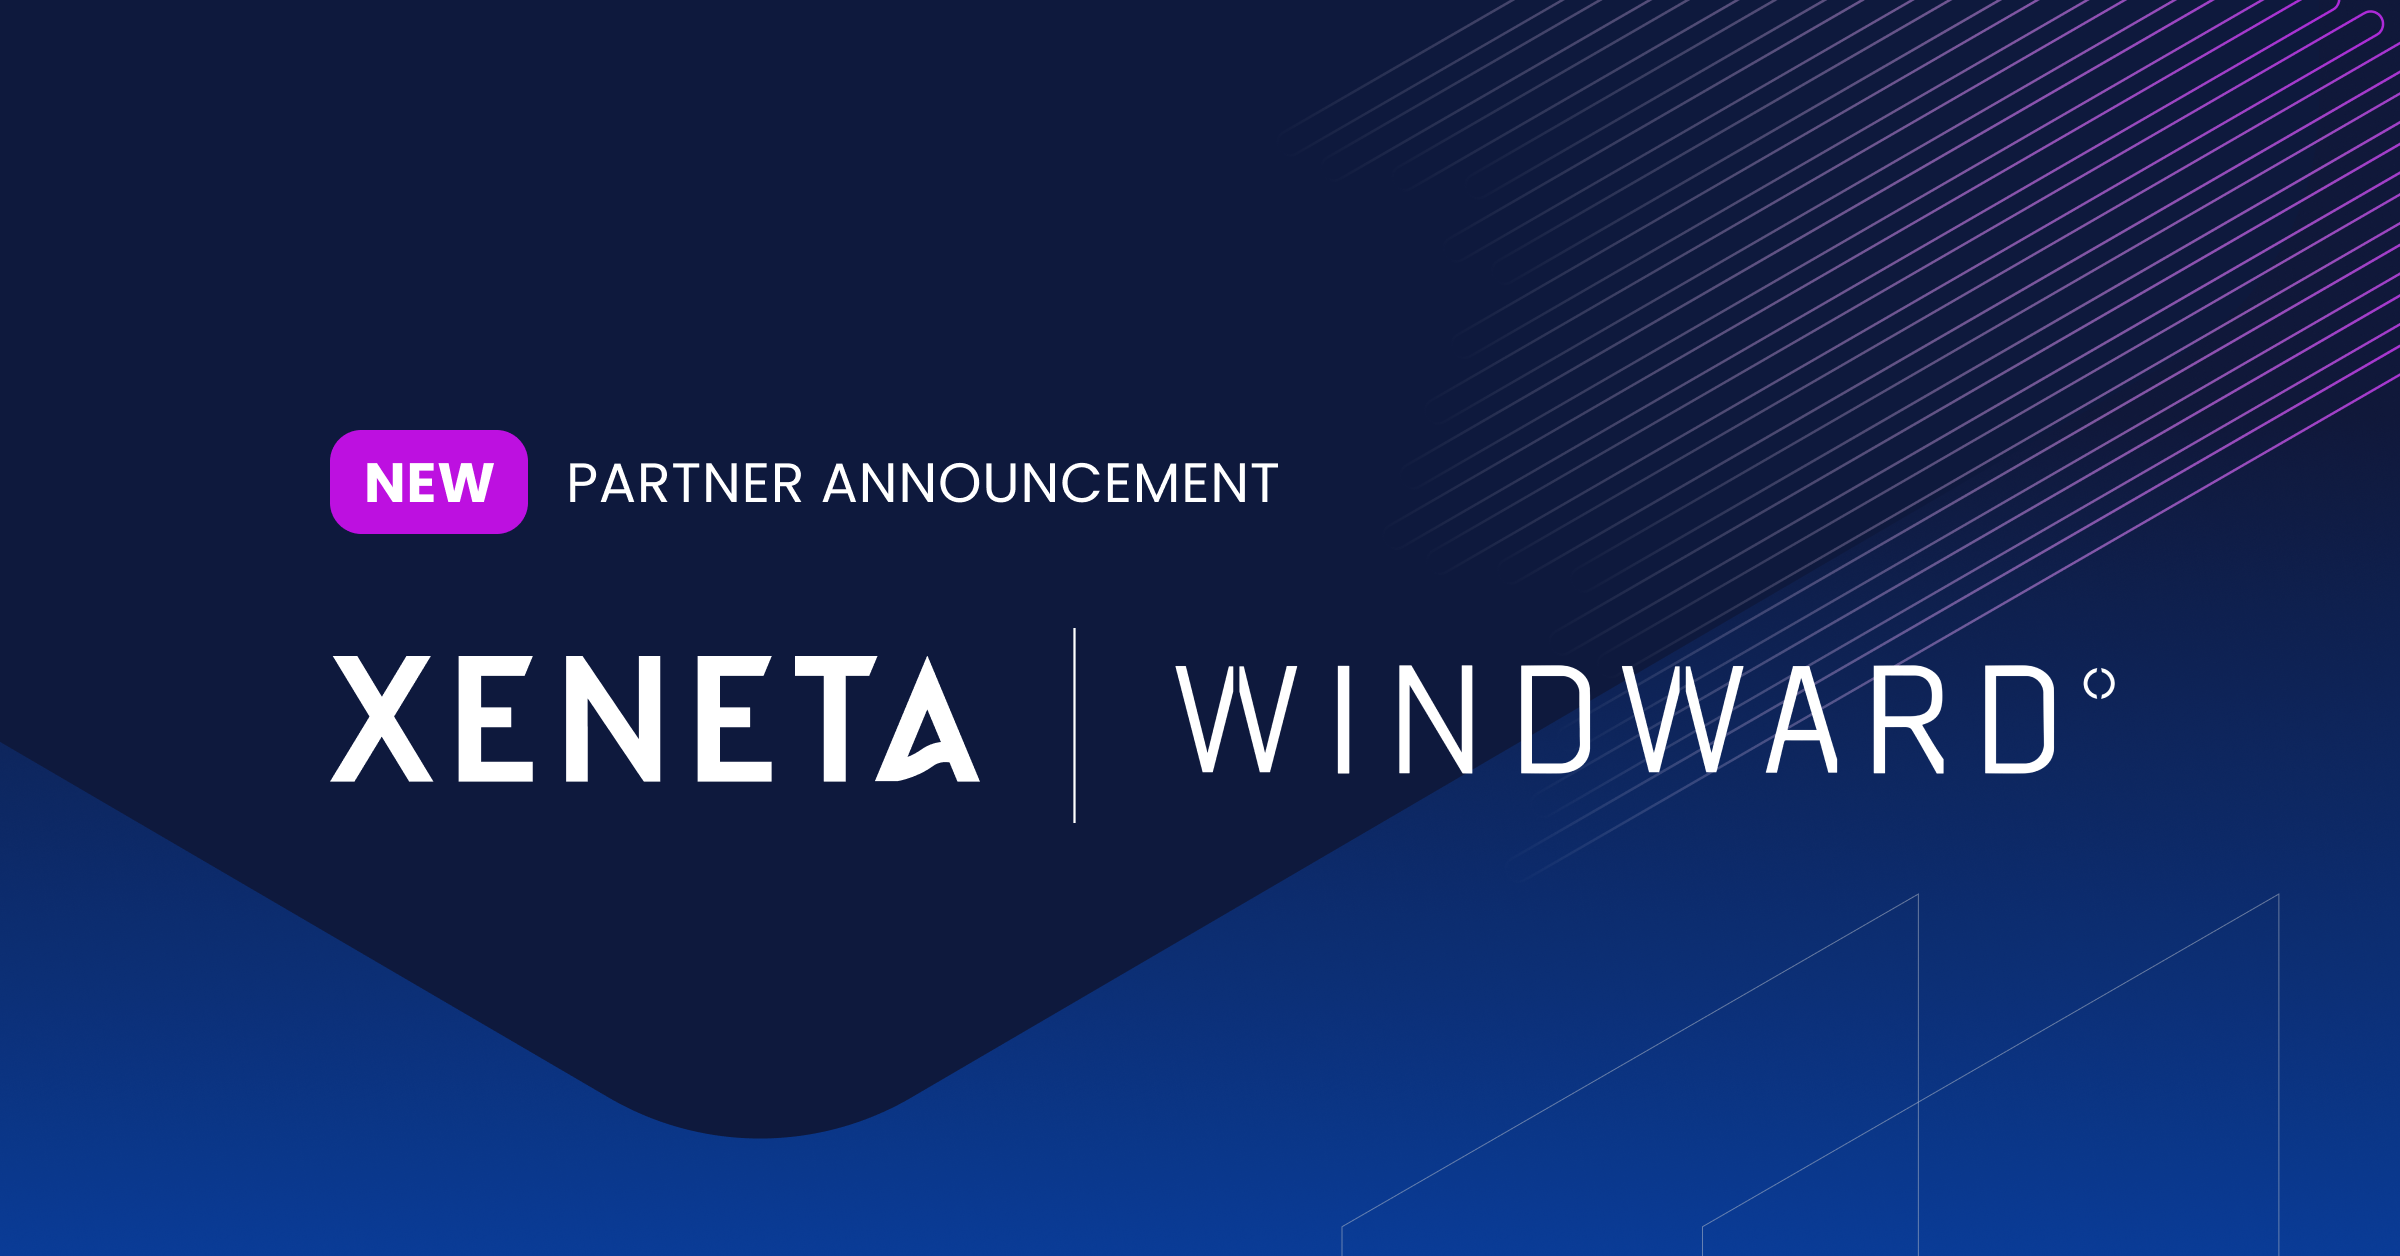 Xeneta partners with Windward to empower shippers full visibility of shipments